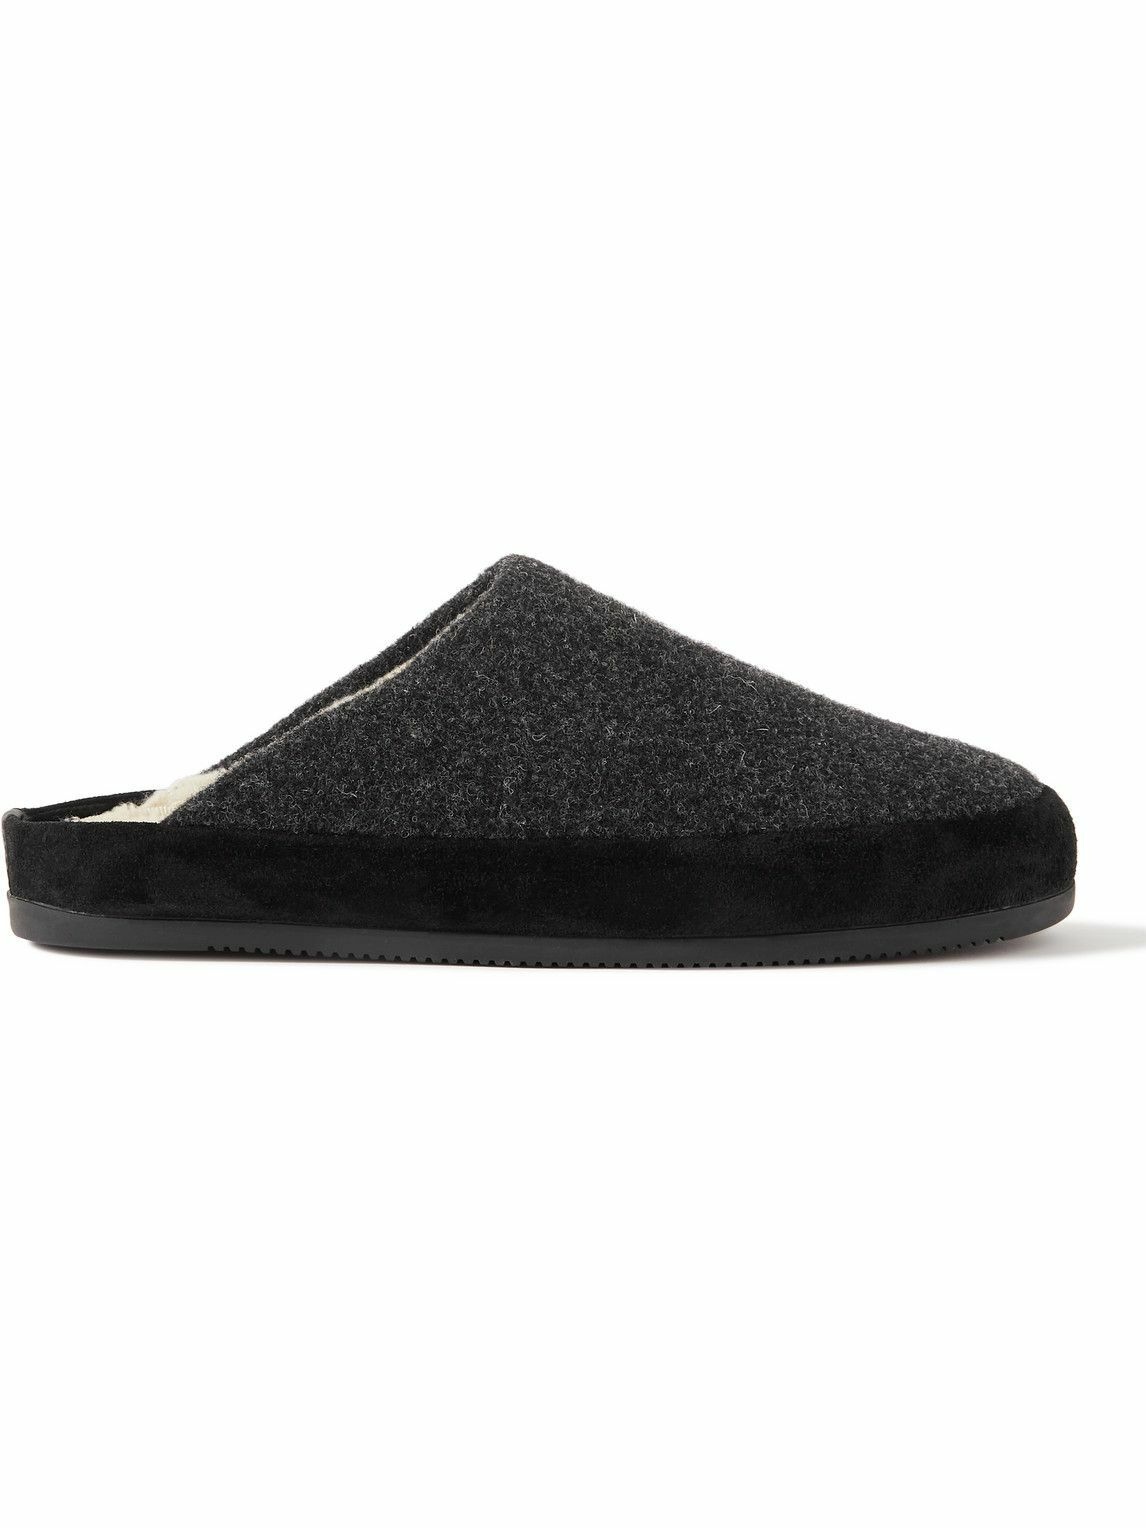 Photo: Mulo - Suede-Trimmed Shearling-Lined Recycled-Wool Slippers - Gray